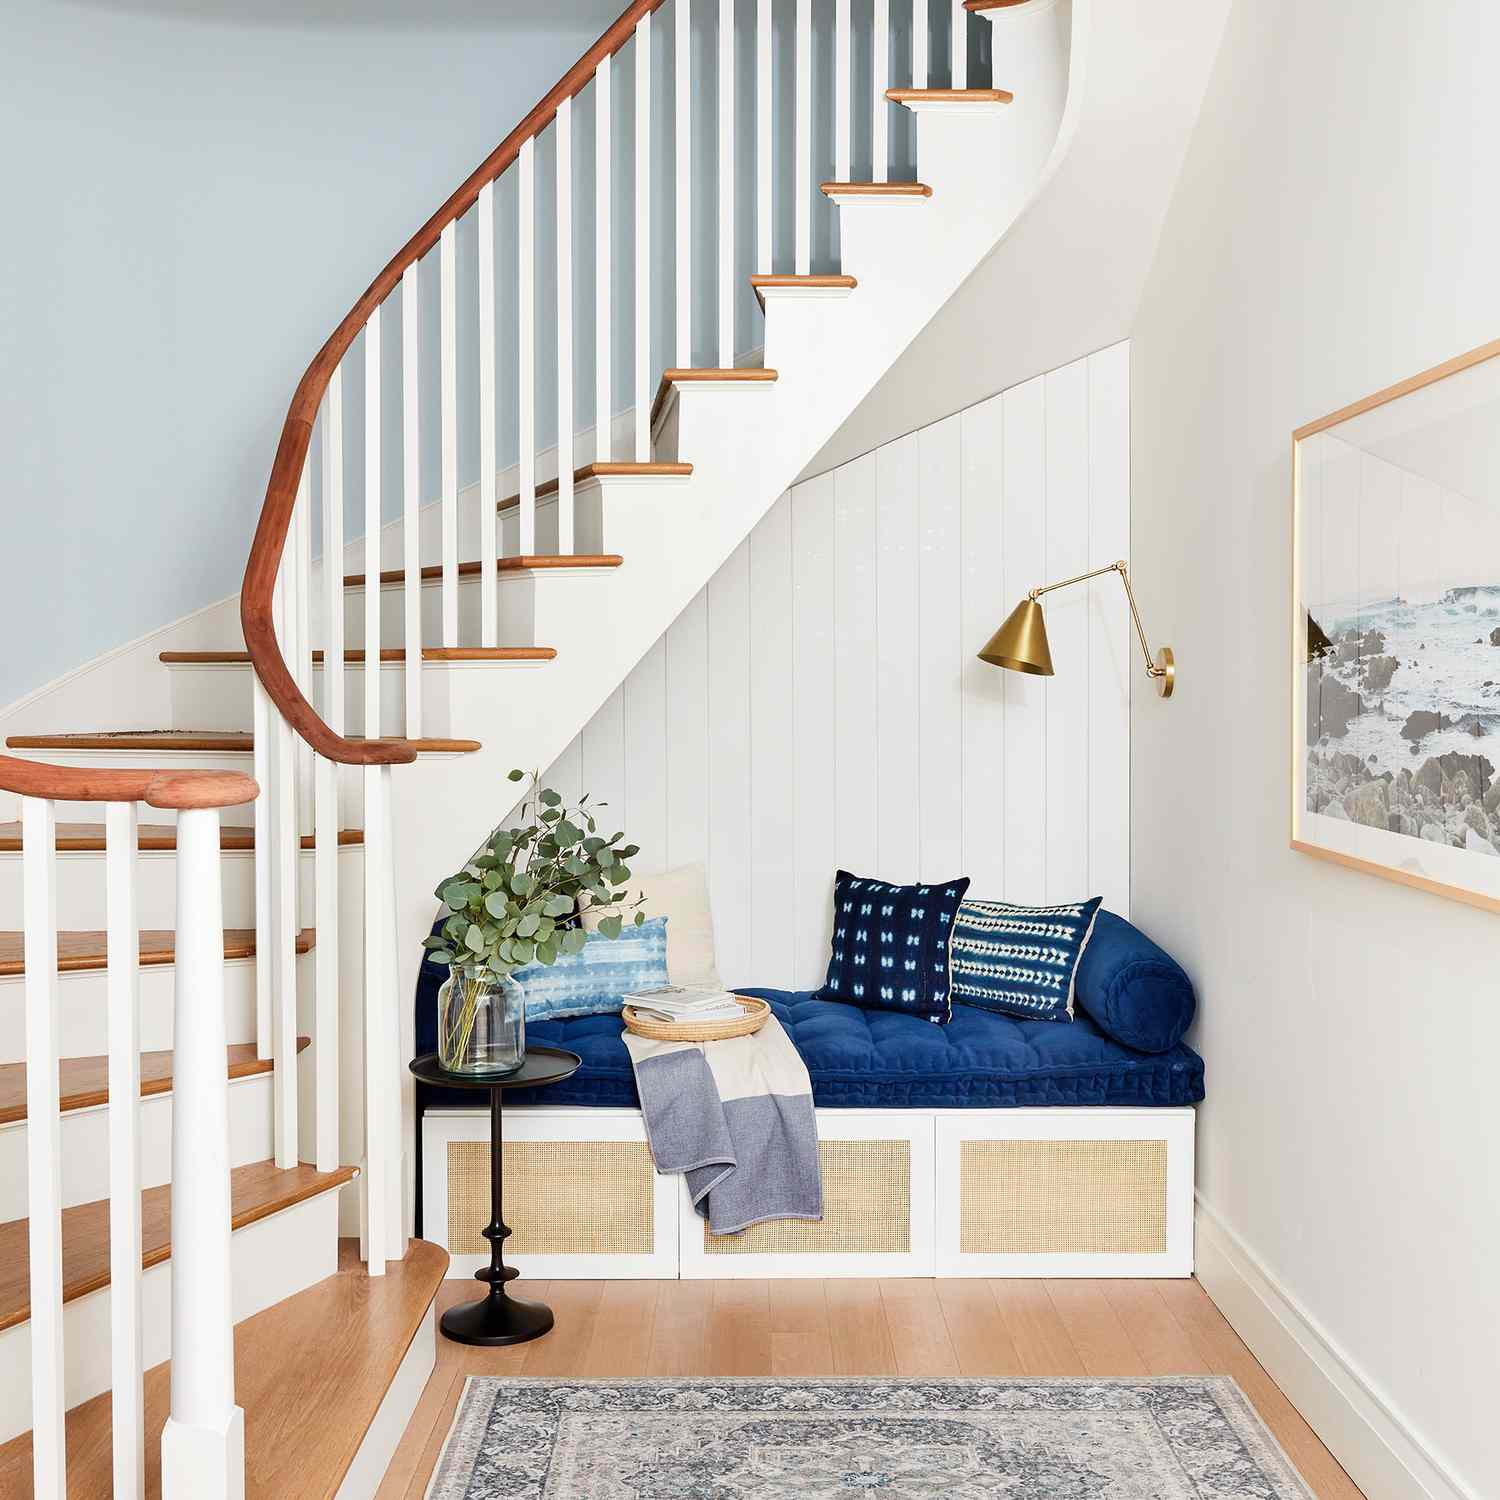 2020 Real Simple Home Tour: Stairs with shiplap